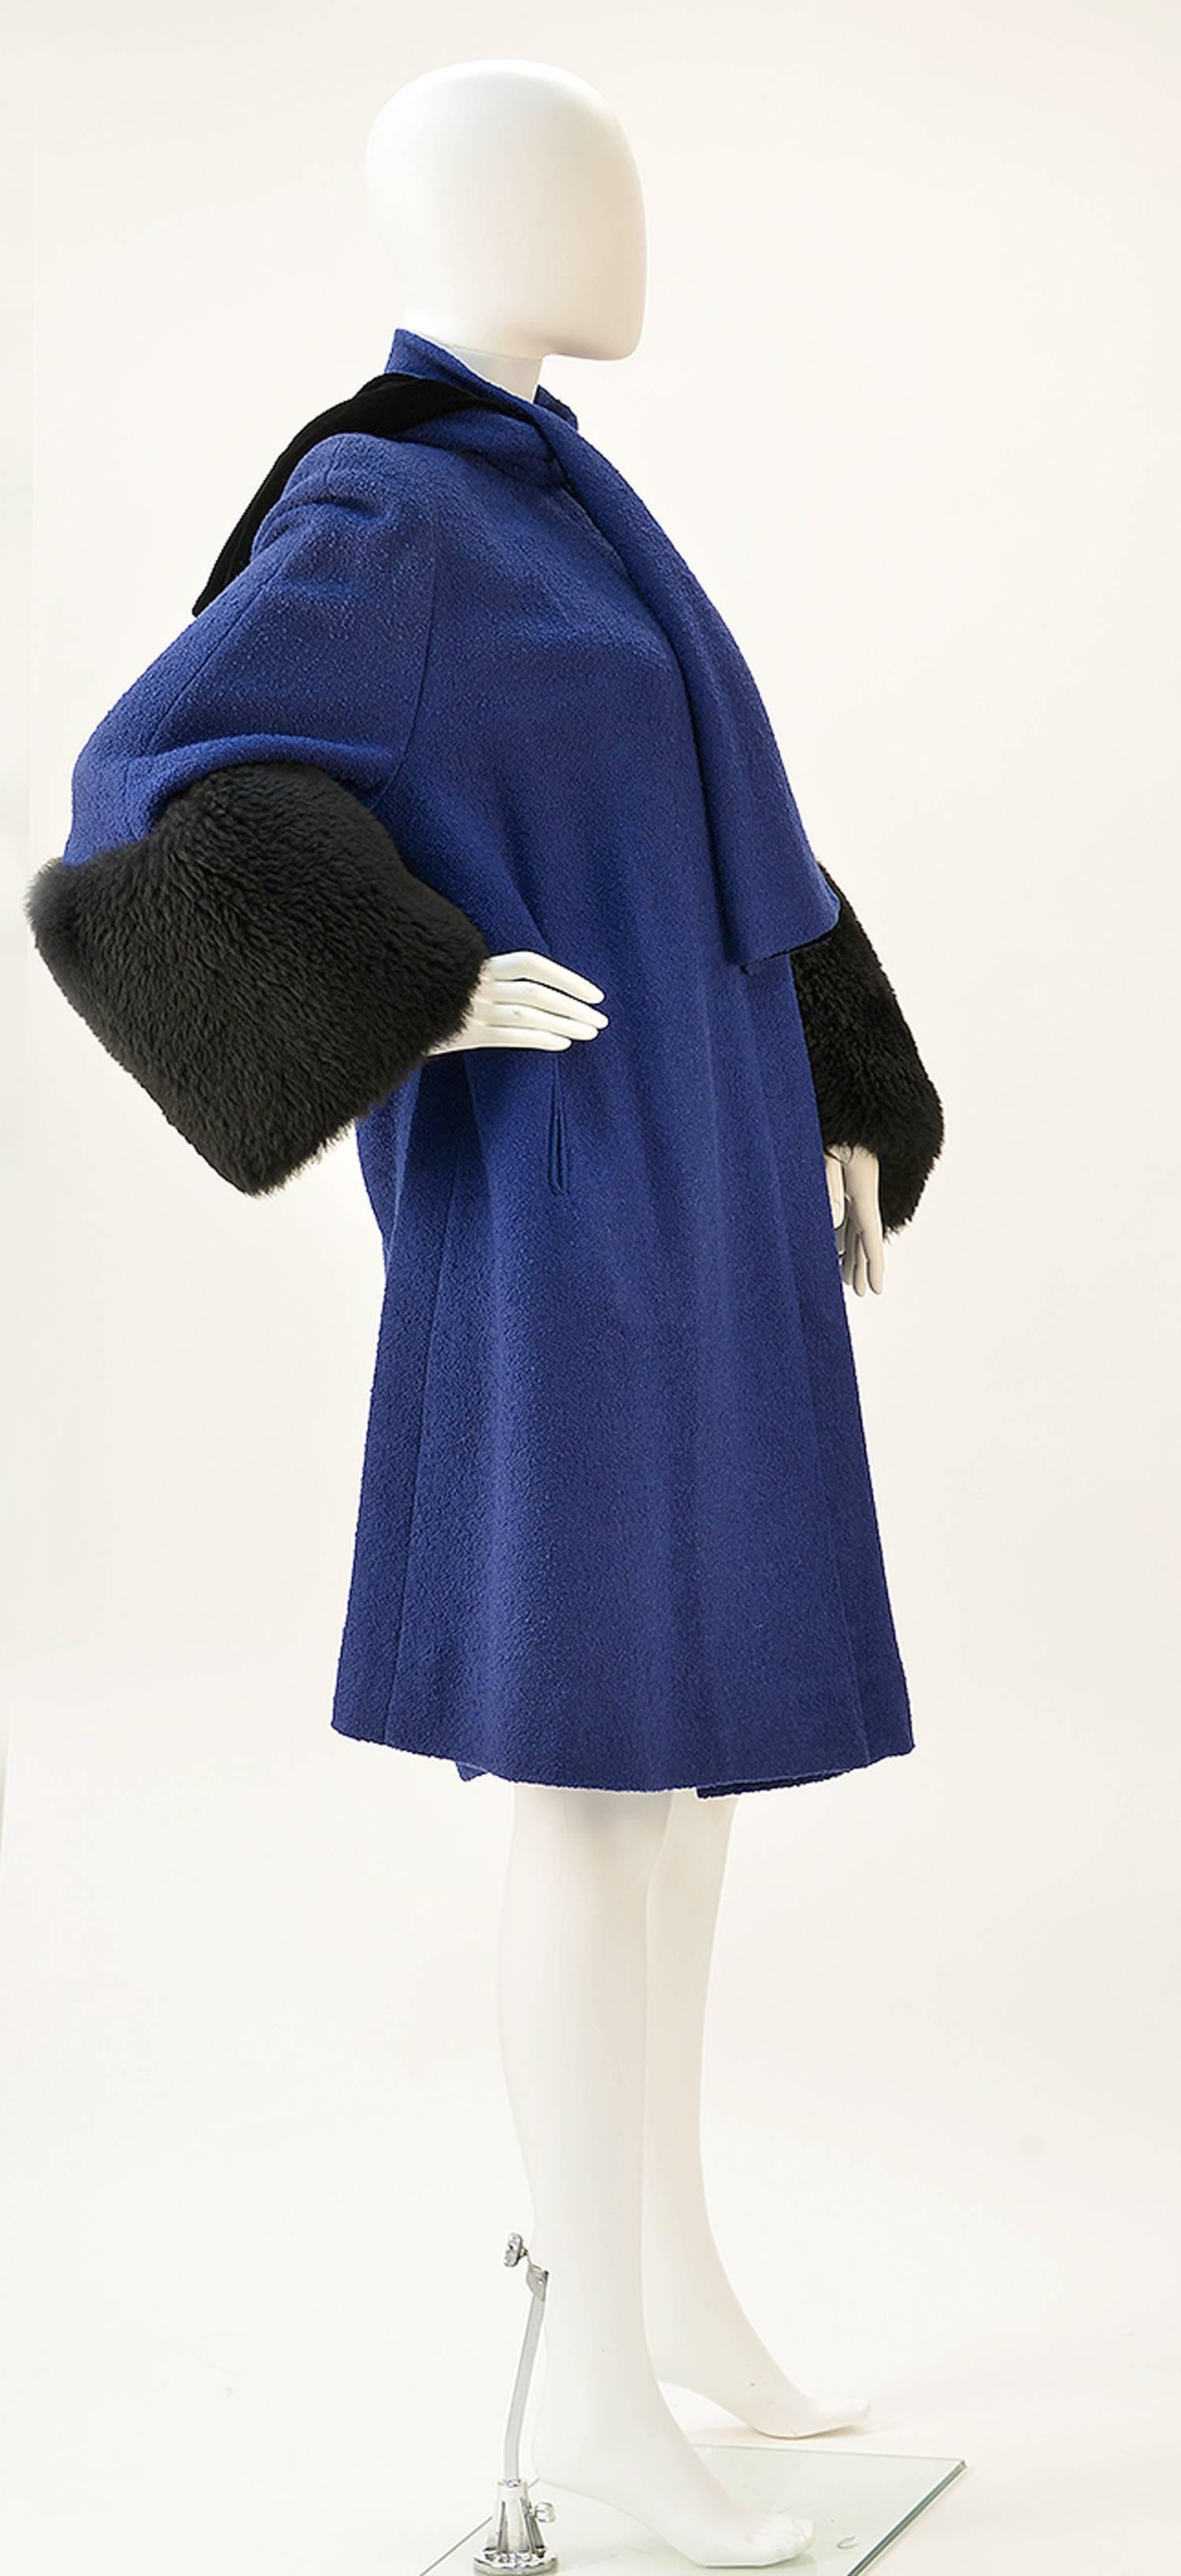 Post- war fabulous blue boucle wool A-line coat made by Julliard. Over sized black lambskin cuffs give an added flair. Sewn in scarf and rhinestone scarf ring attached. Two large button closure. Large side pockets. 100% virgin wool.

Modern size